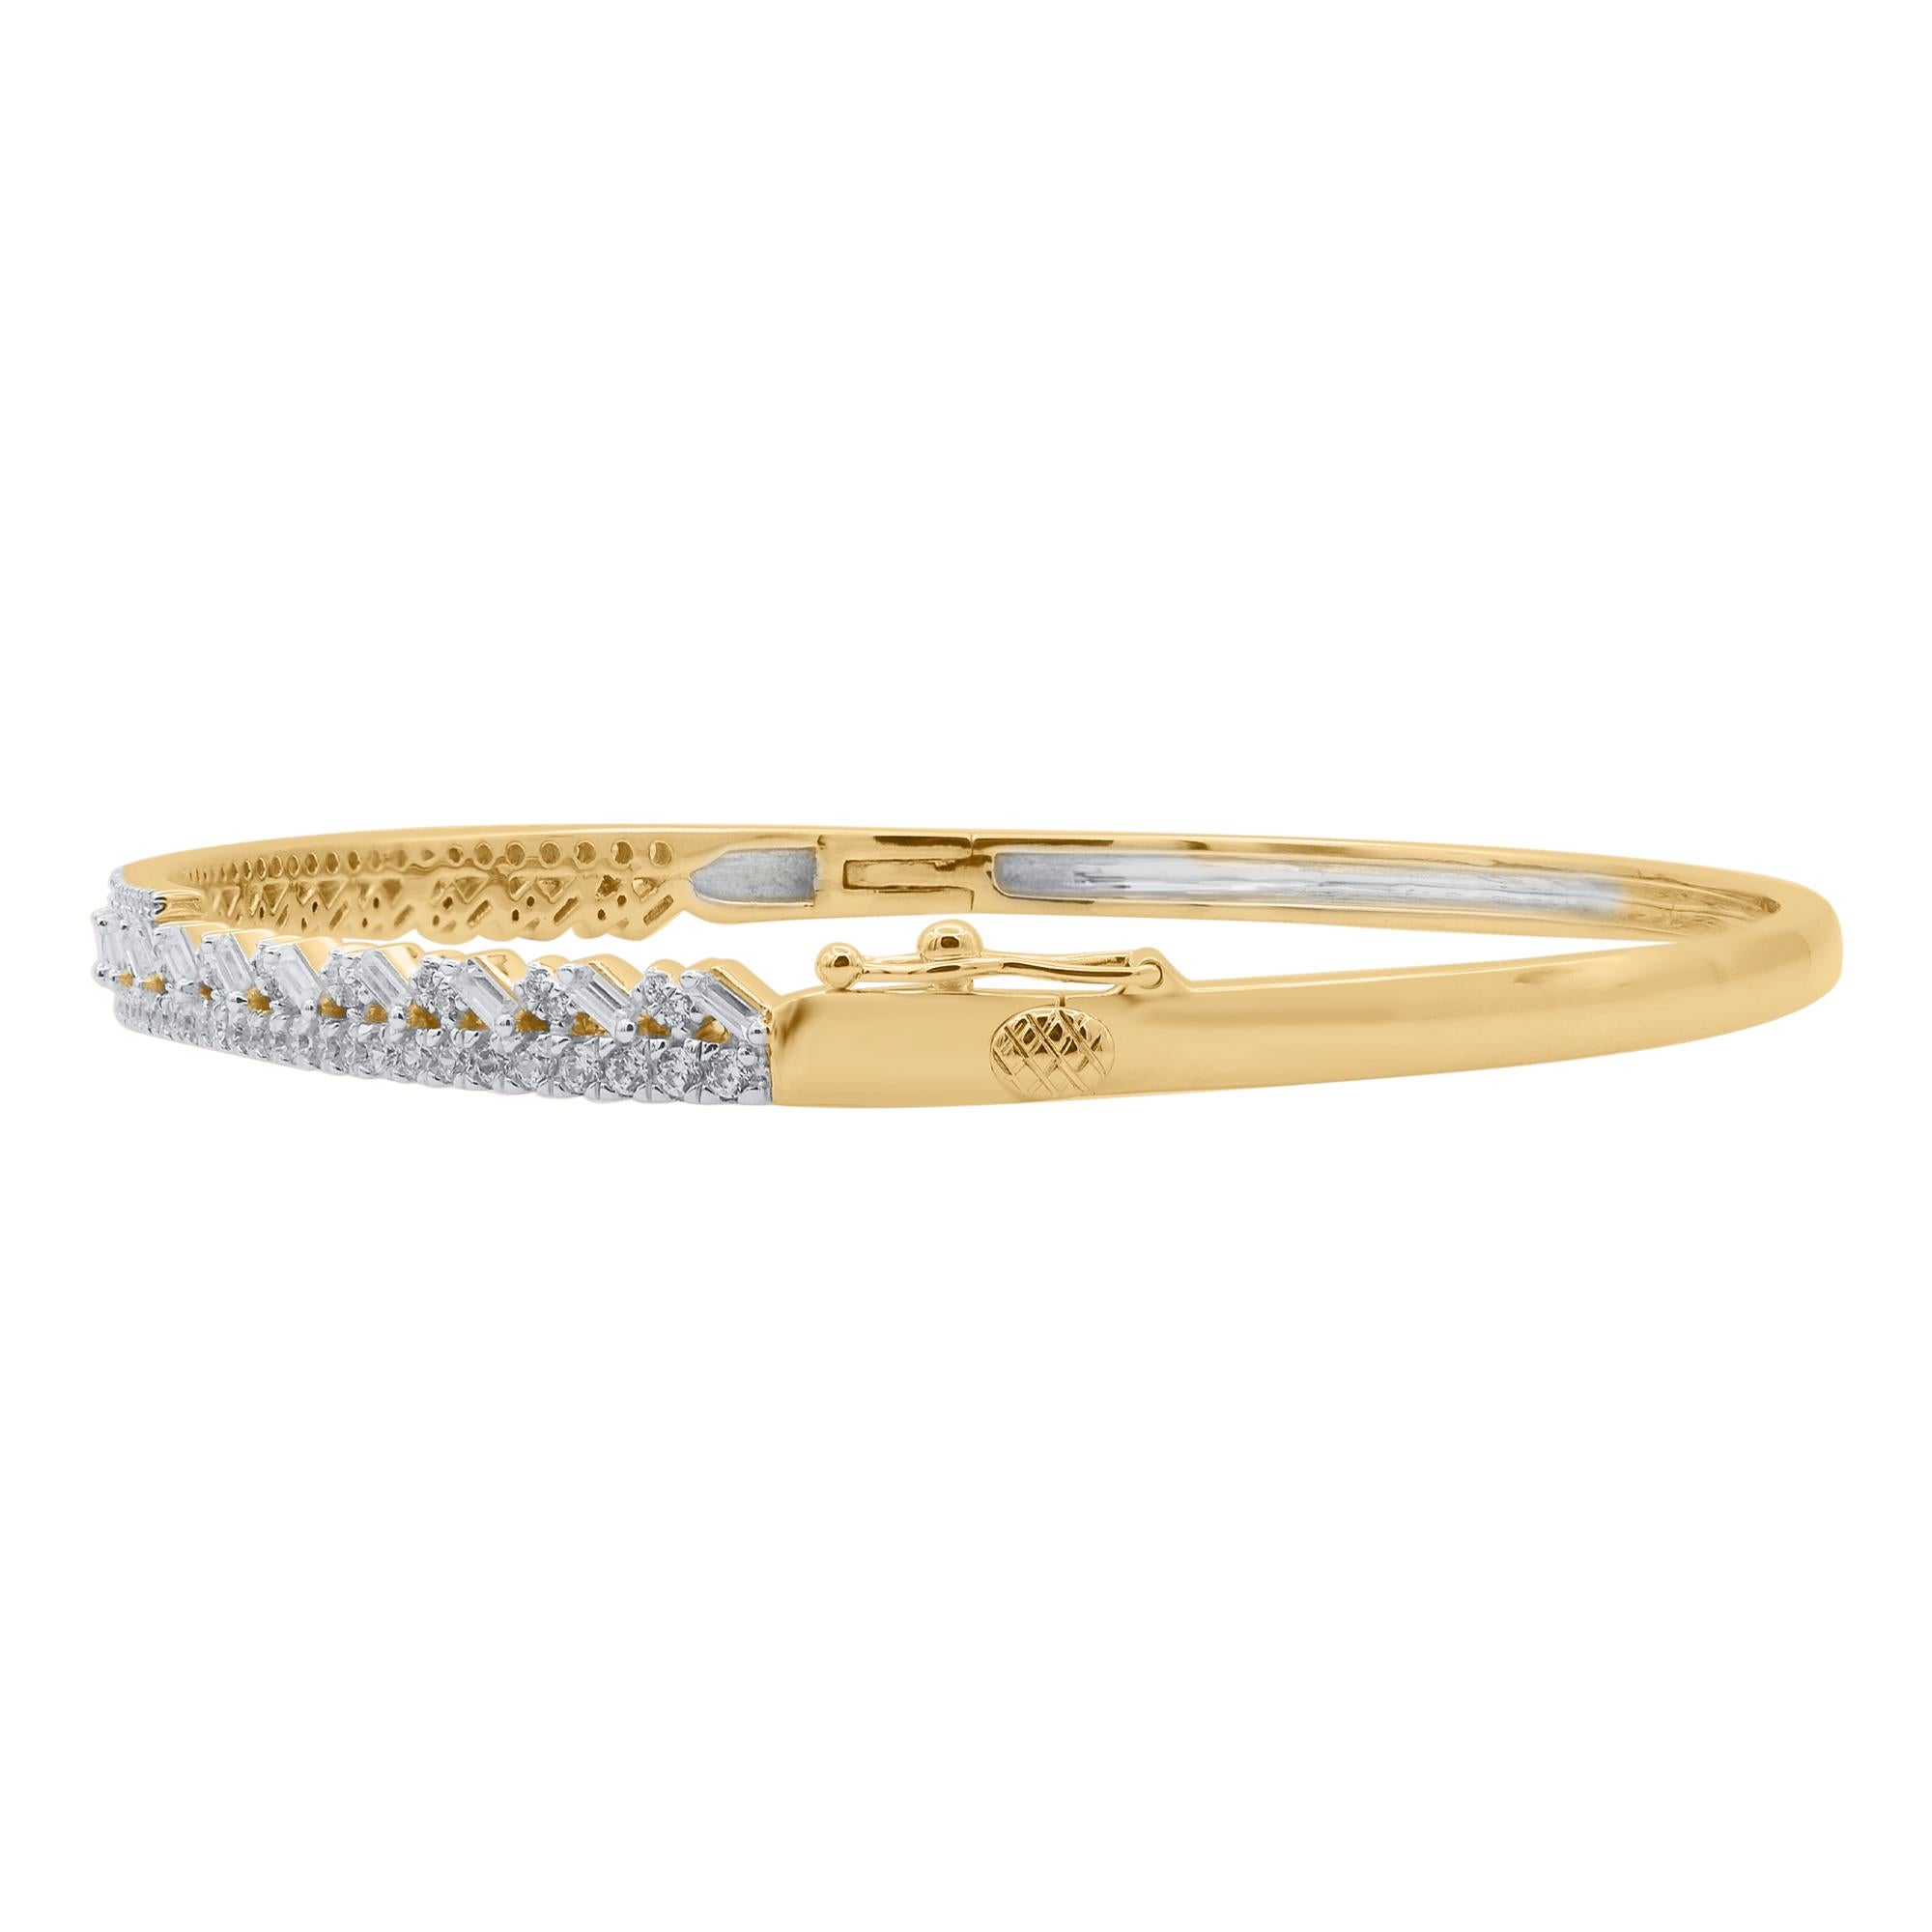 Add a sweet touch to all your favourite looks with this subtle diamond bangle bracelet.
This Shimmering bangle bracelet features 139 natural single cut, brilliant cut & baguette diamonds in prong setting and crafted in 18kt yellow gold. Diamonds are